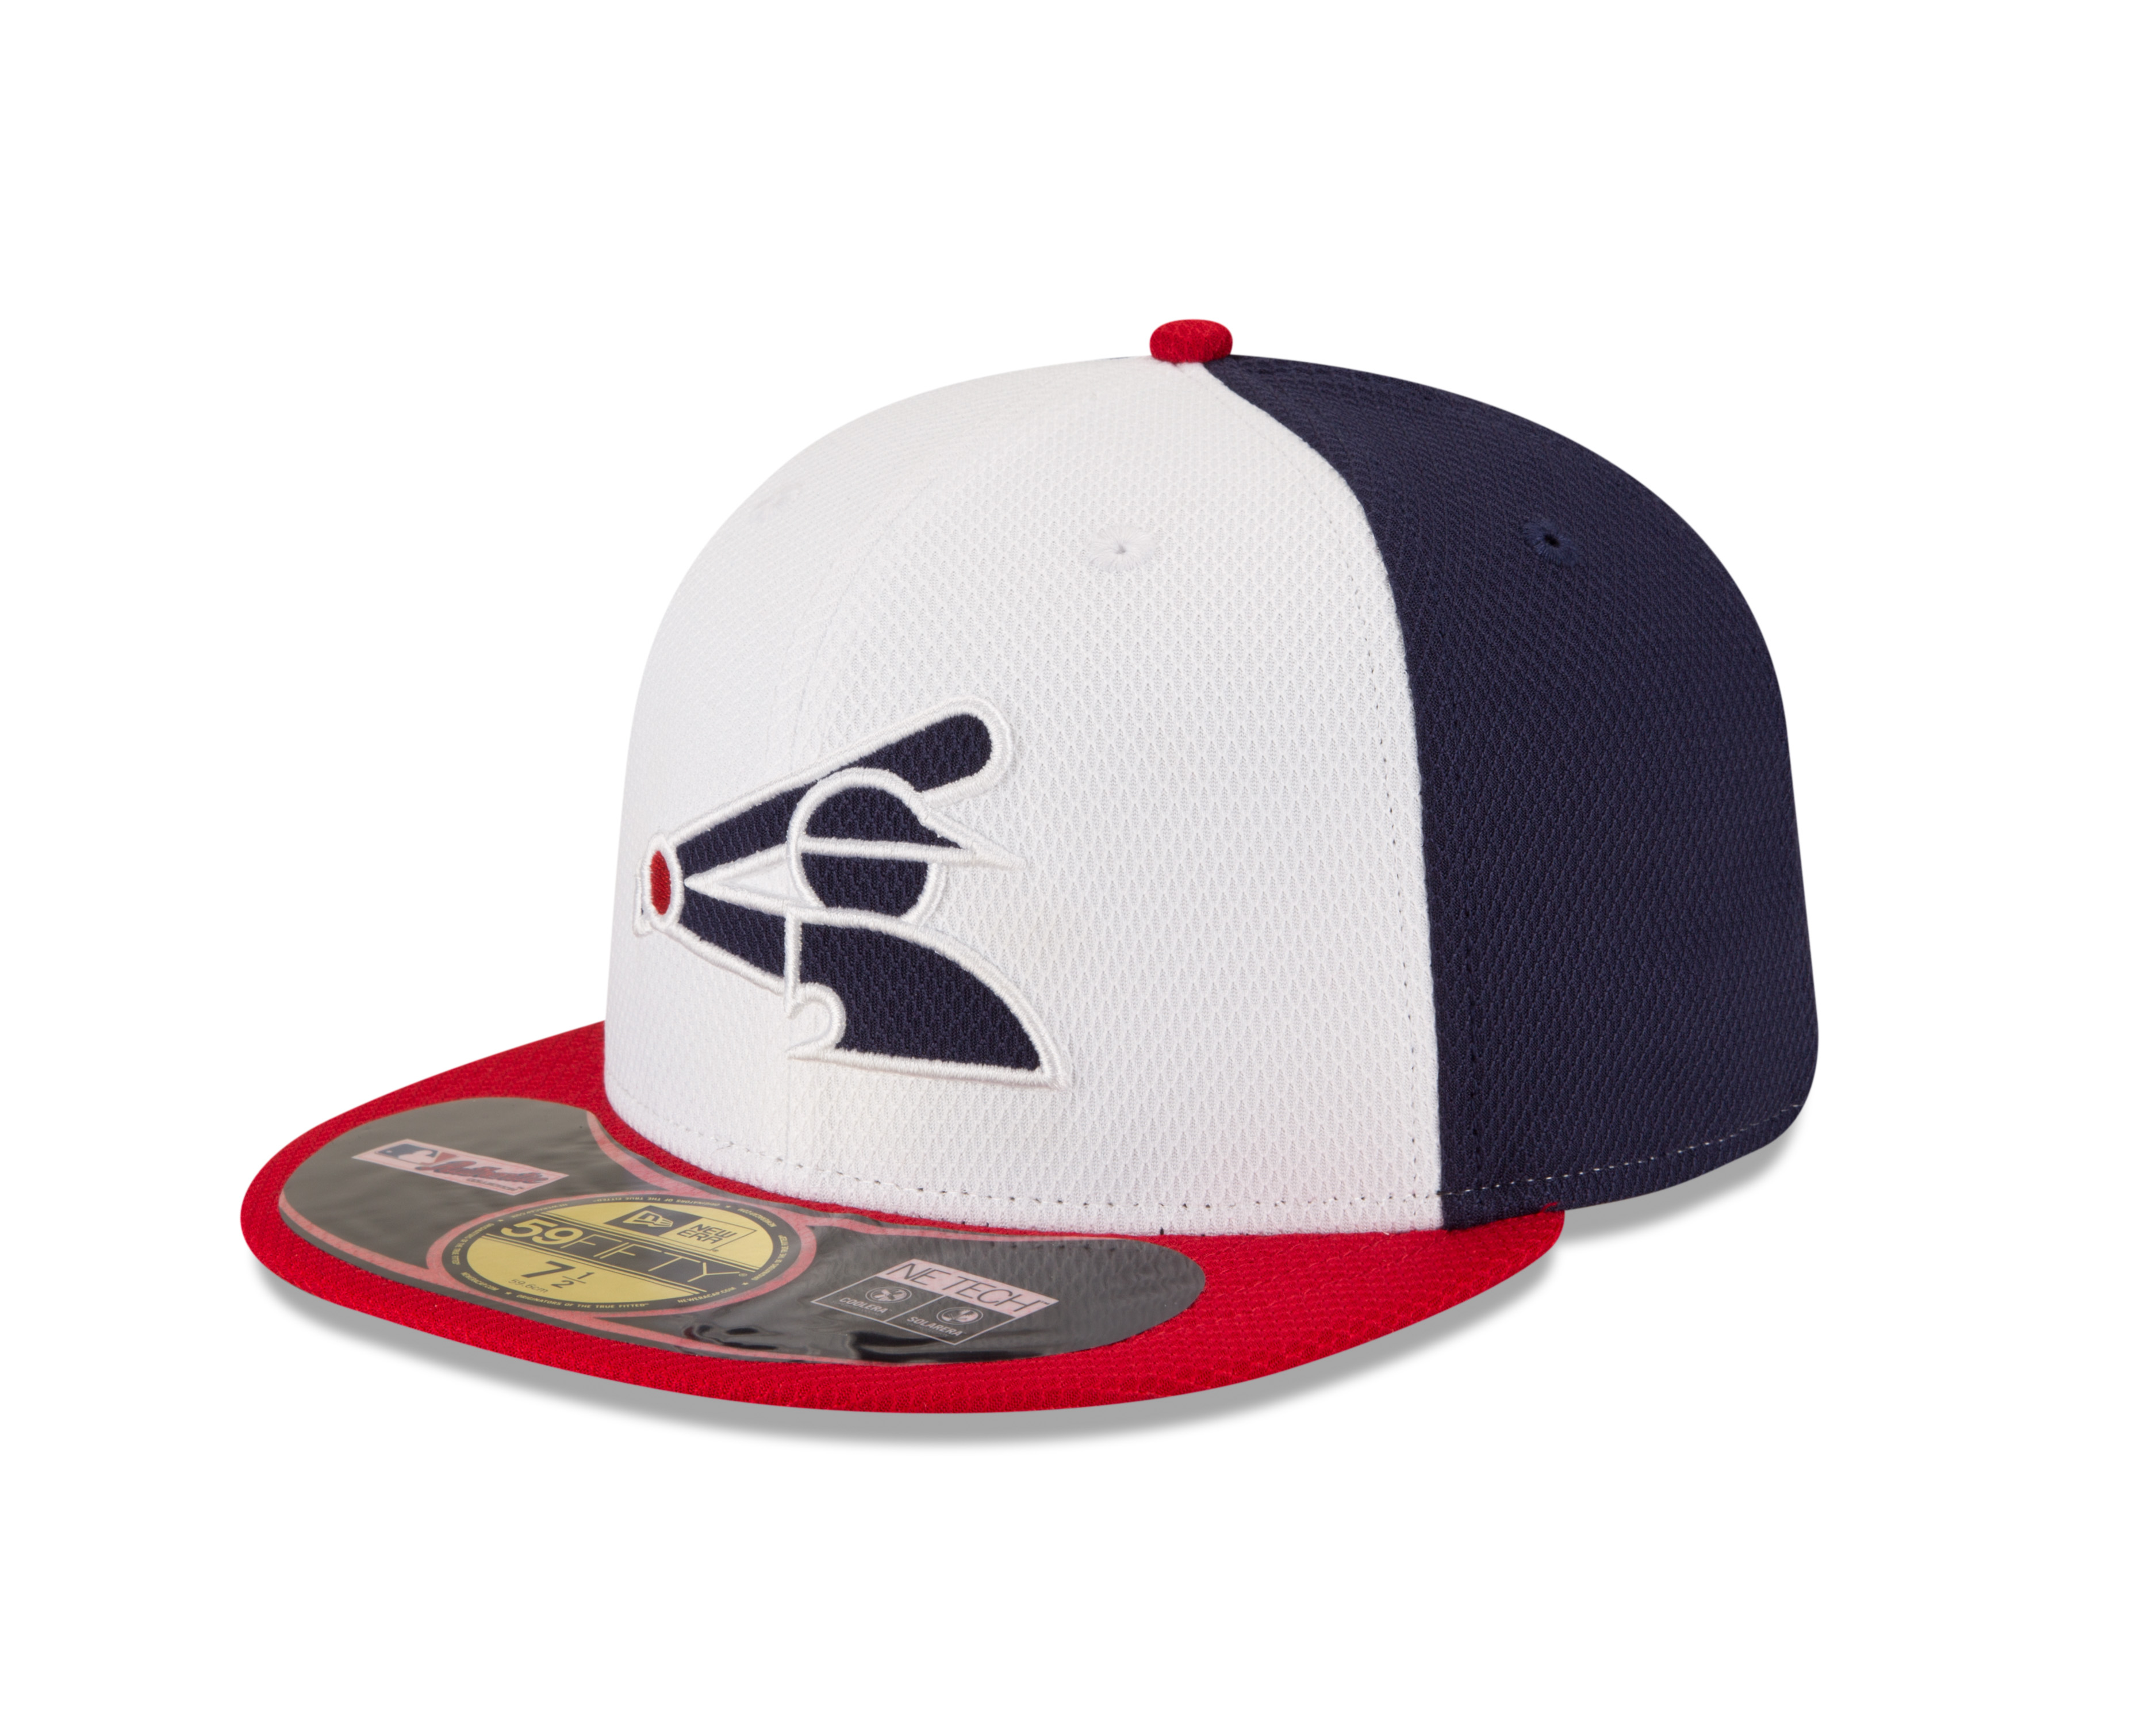 Check out some of MLB's newest and coolest Spring Training caps